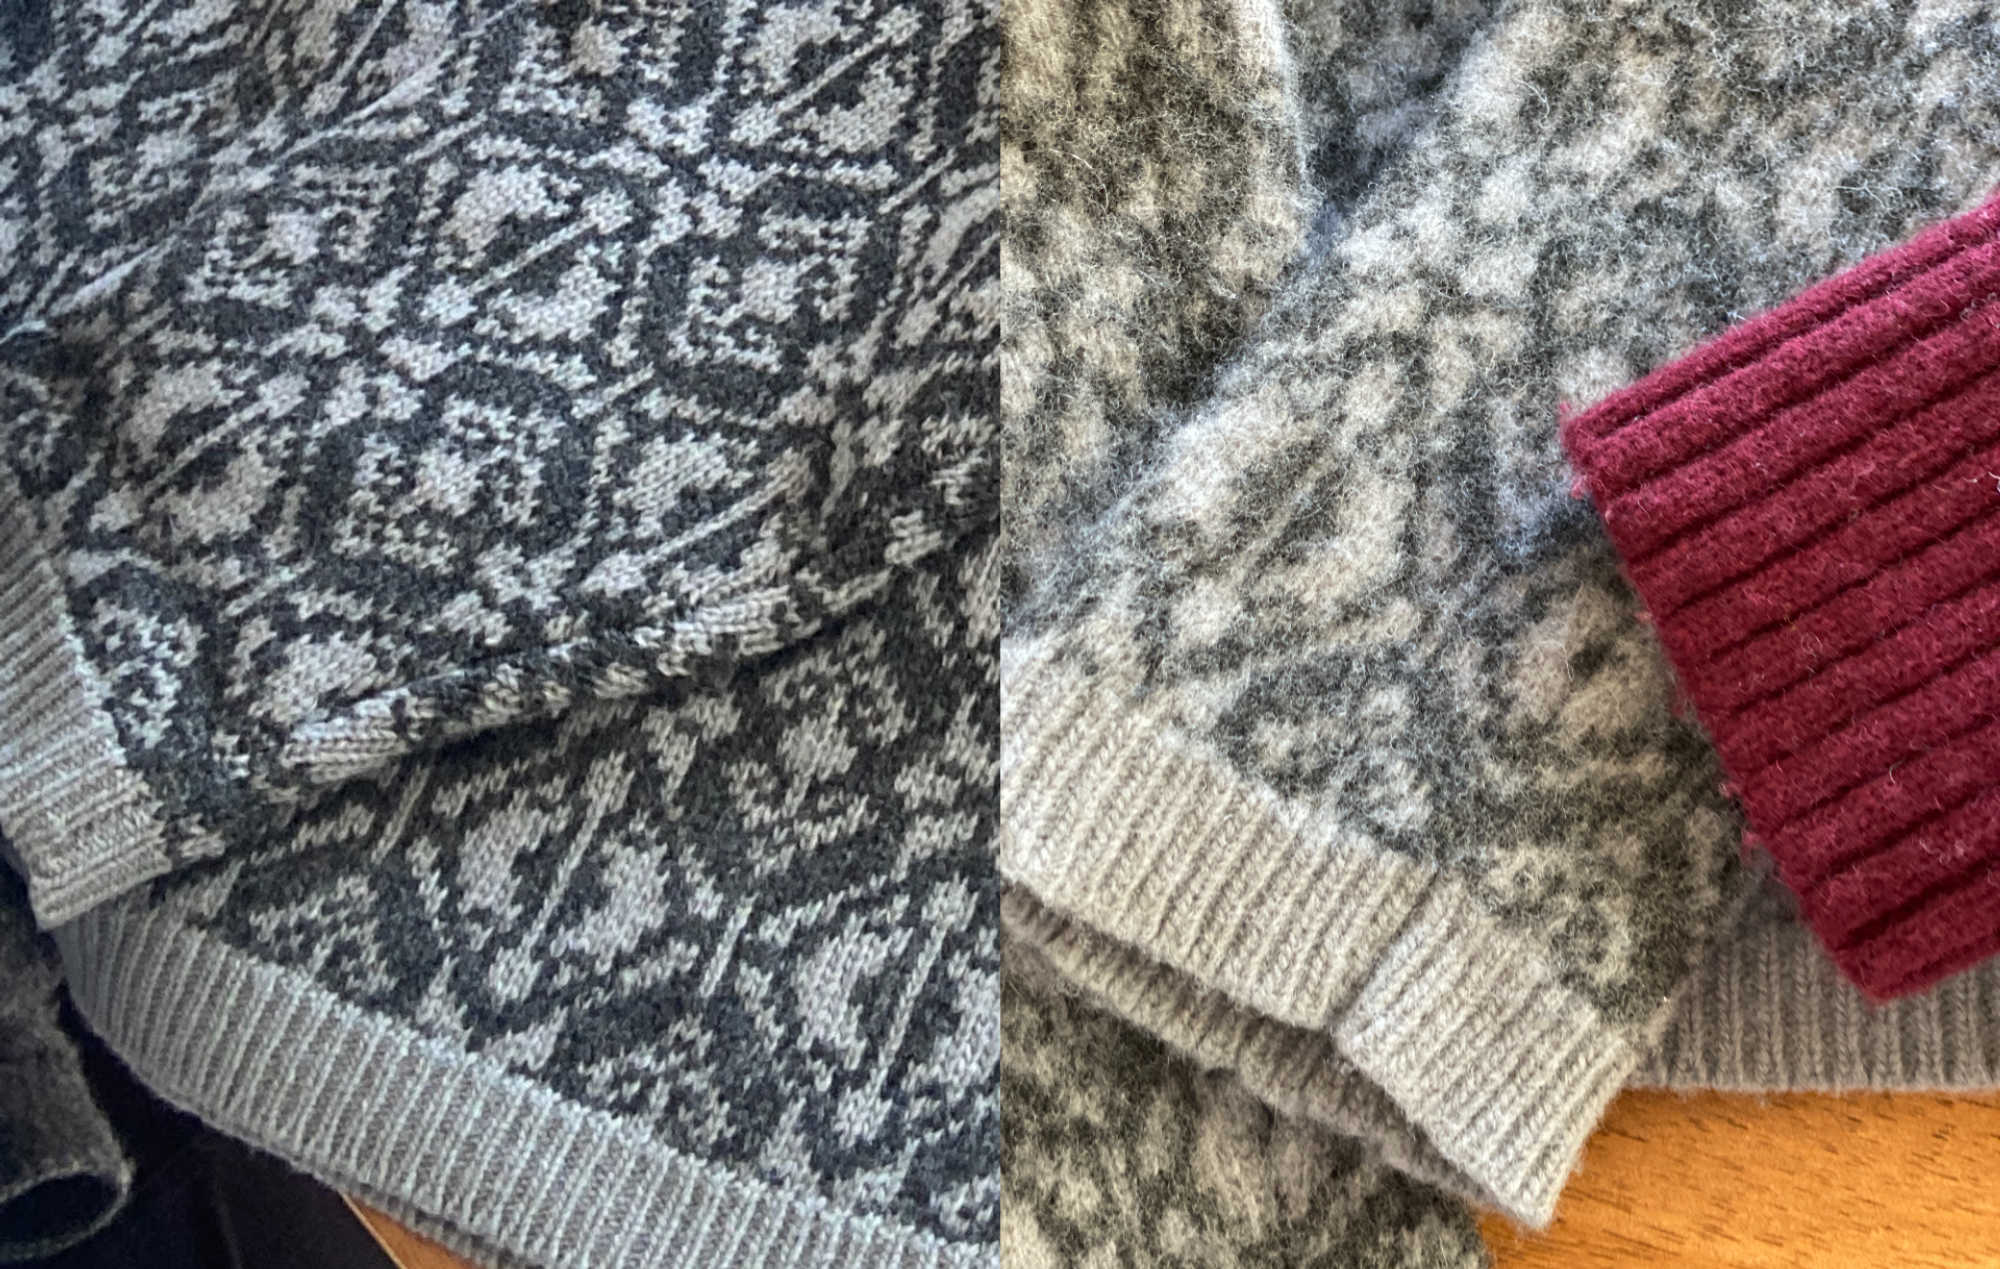 A side-by-side of two wool sweaters (one grey, one maroon) before and after the felting process. The "after" sweaters are stiffer and the colors have faded.